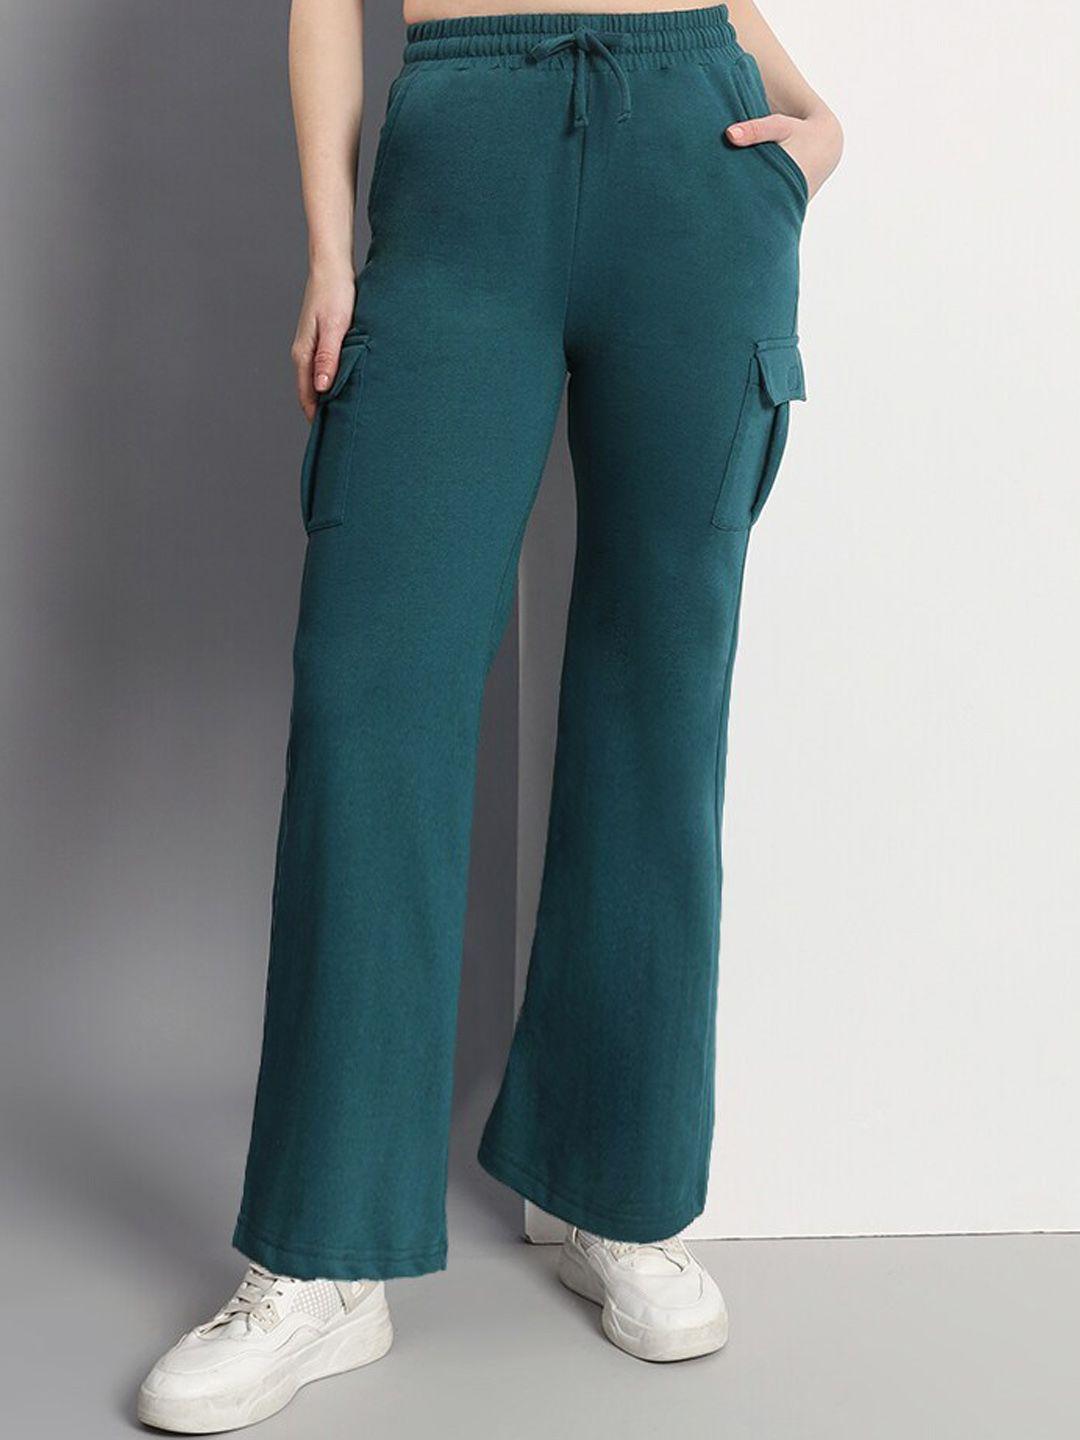 q-rious women relaxed fit track pants